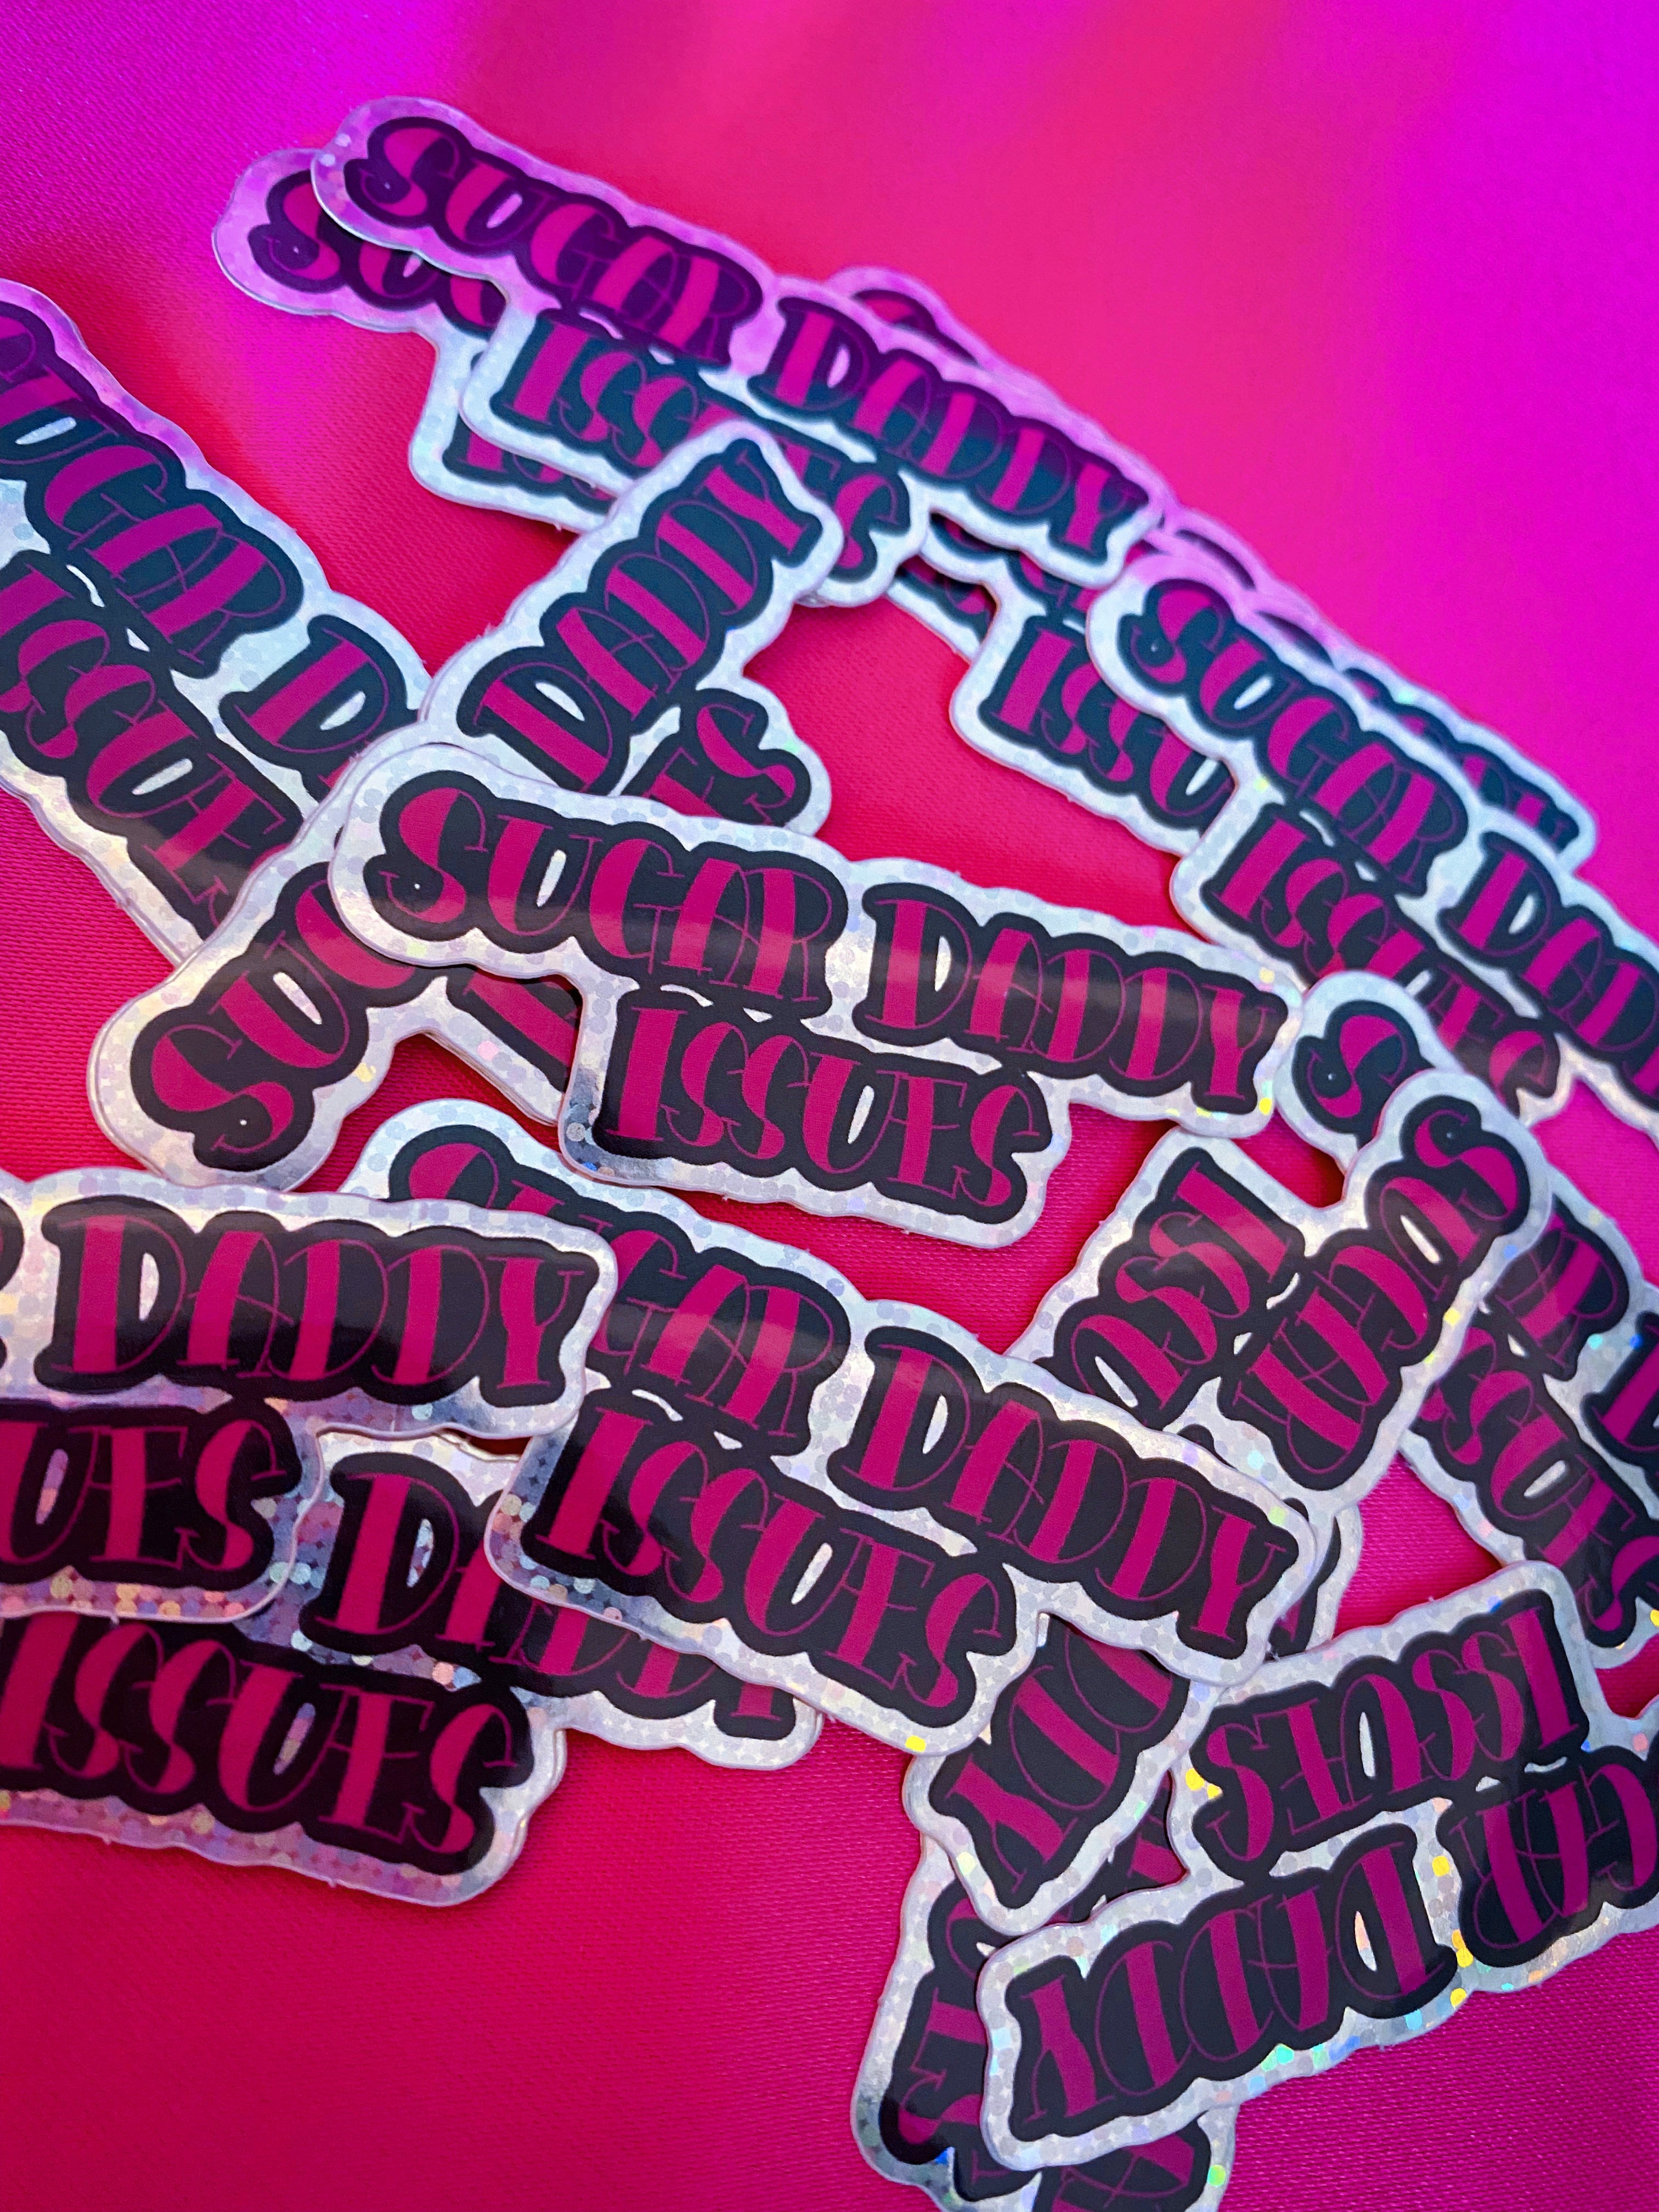 Daddy Issues by the Neighbourhood | Sticker